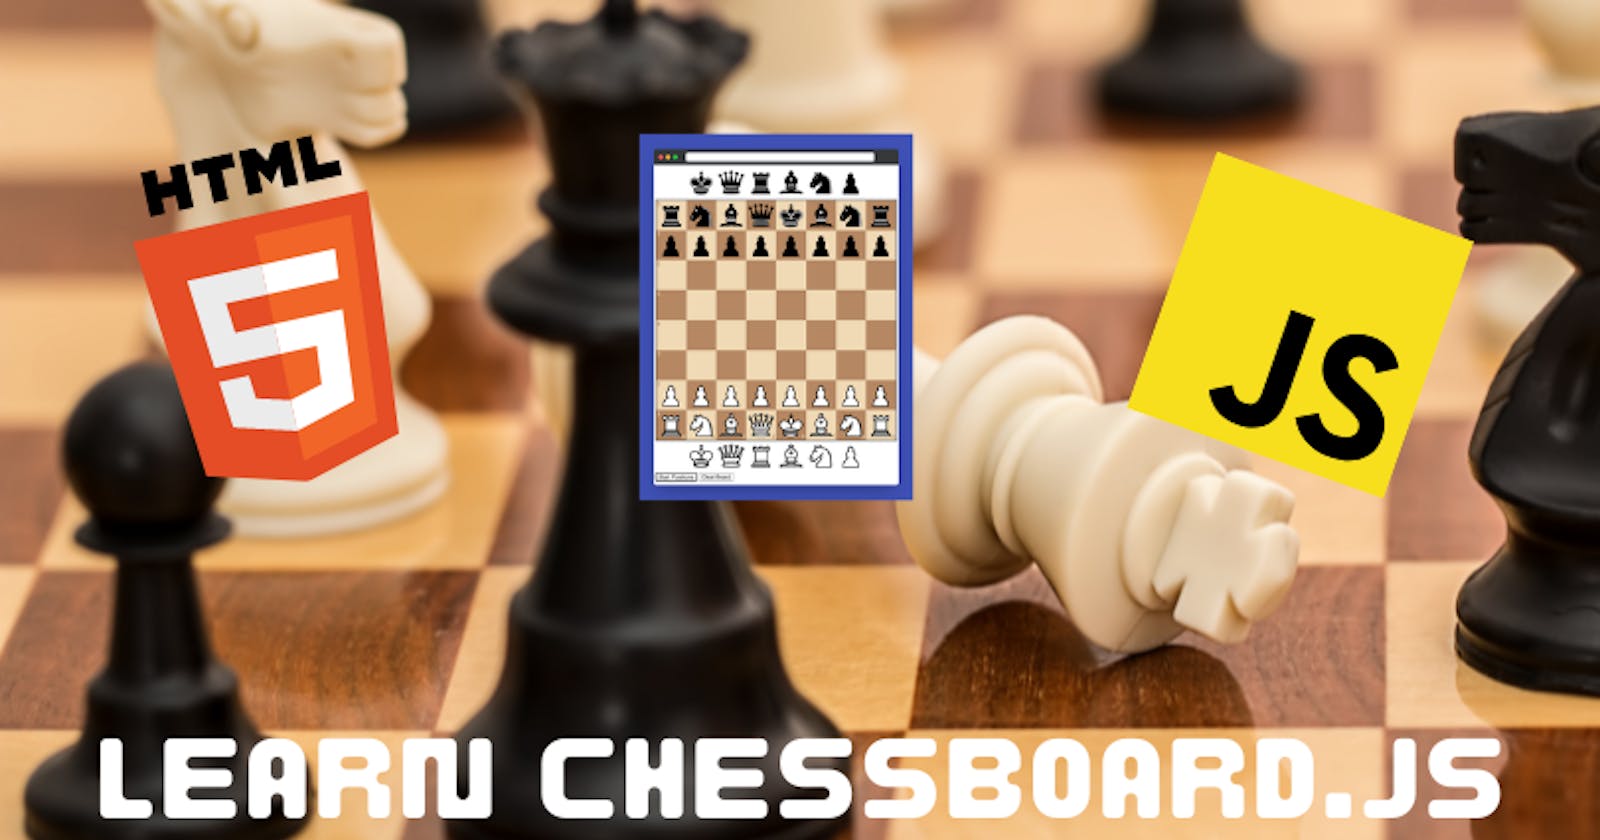 Make a basic chess board with chessboard.js